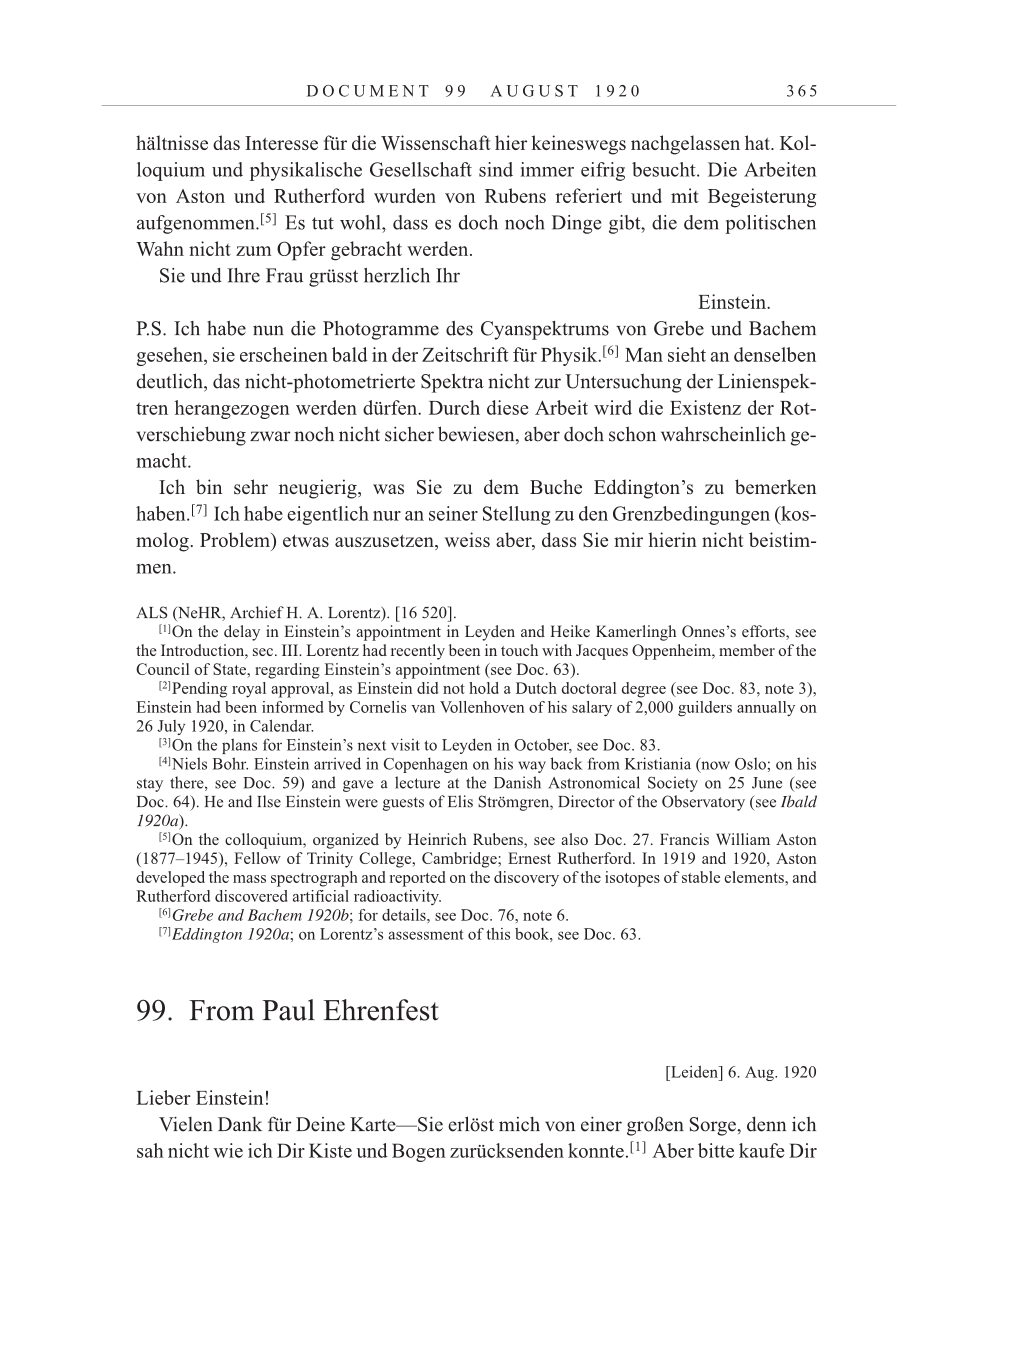 Volume 10: The Berlin Years: Correspondence May-December 1920 / Supplementary Correspondence 1909-1920 page 365